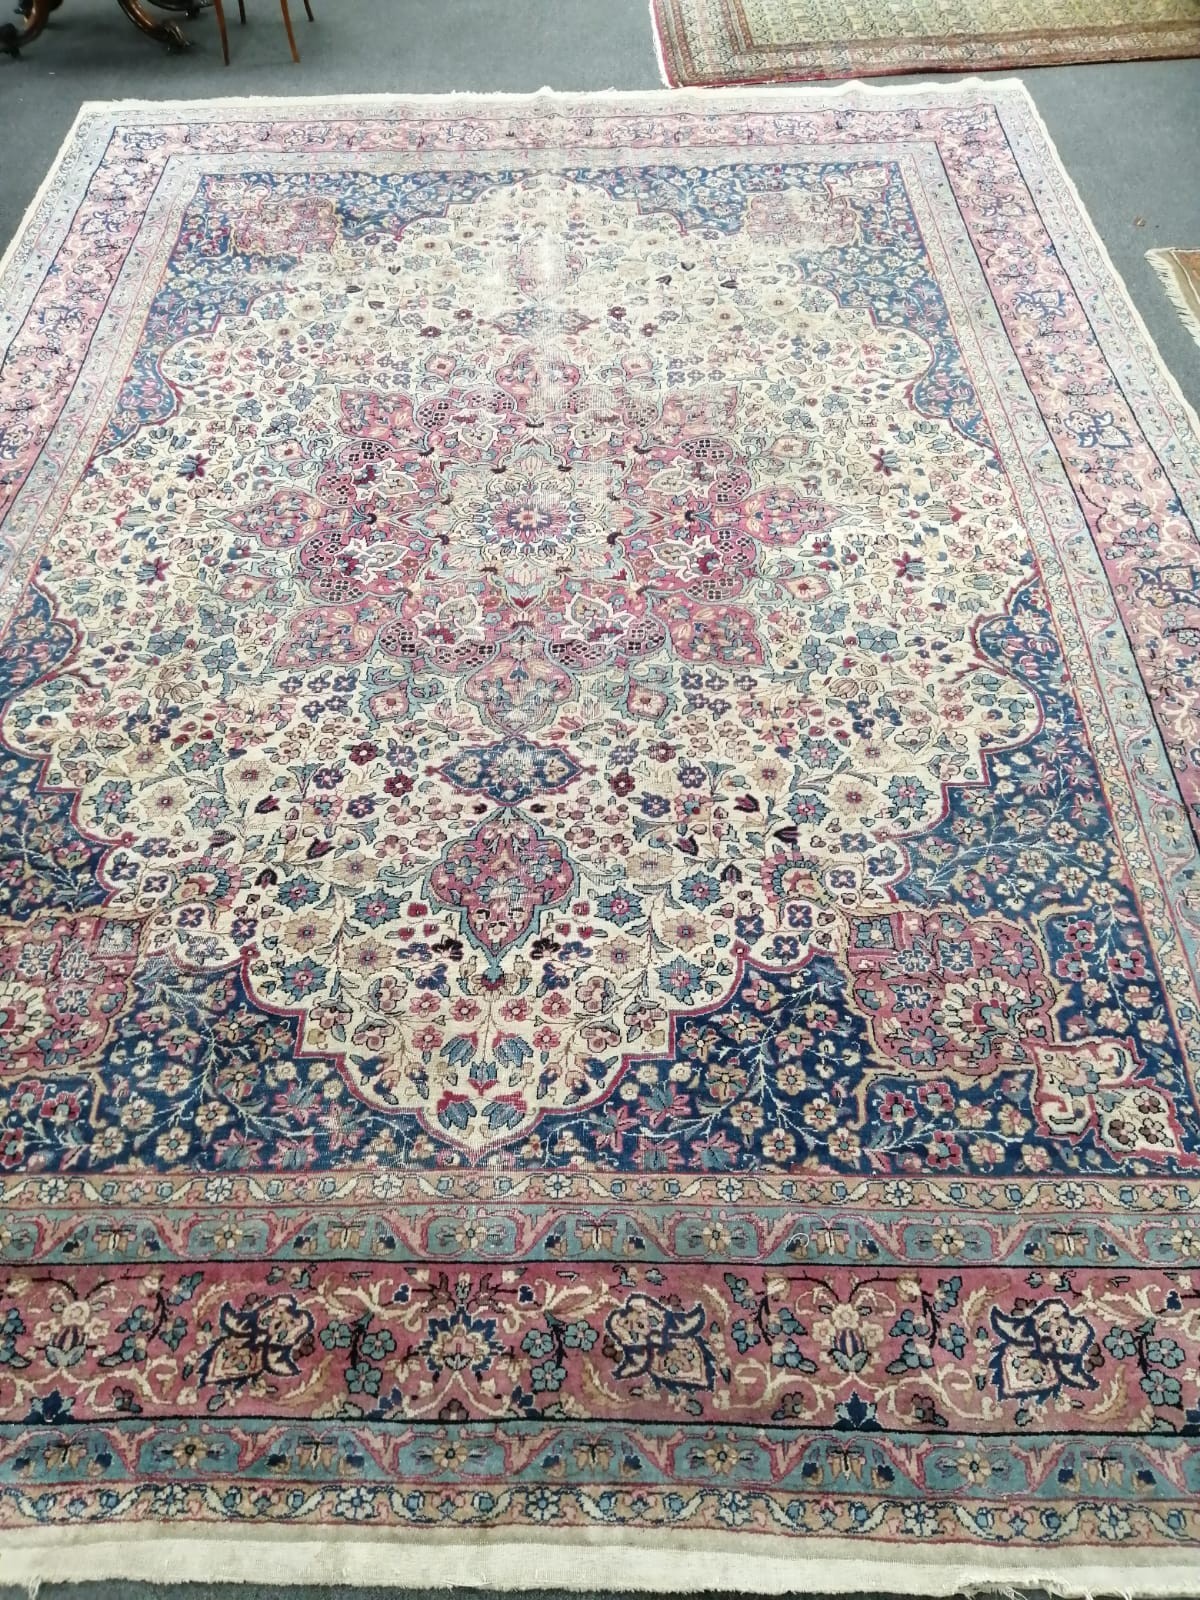 A Persian ivory ground carpet with central medallion of floral motifs, multi-bordered, 400 x 291cm